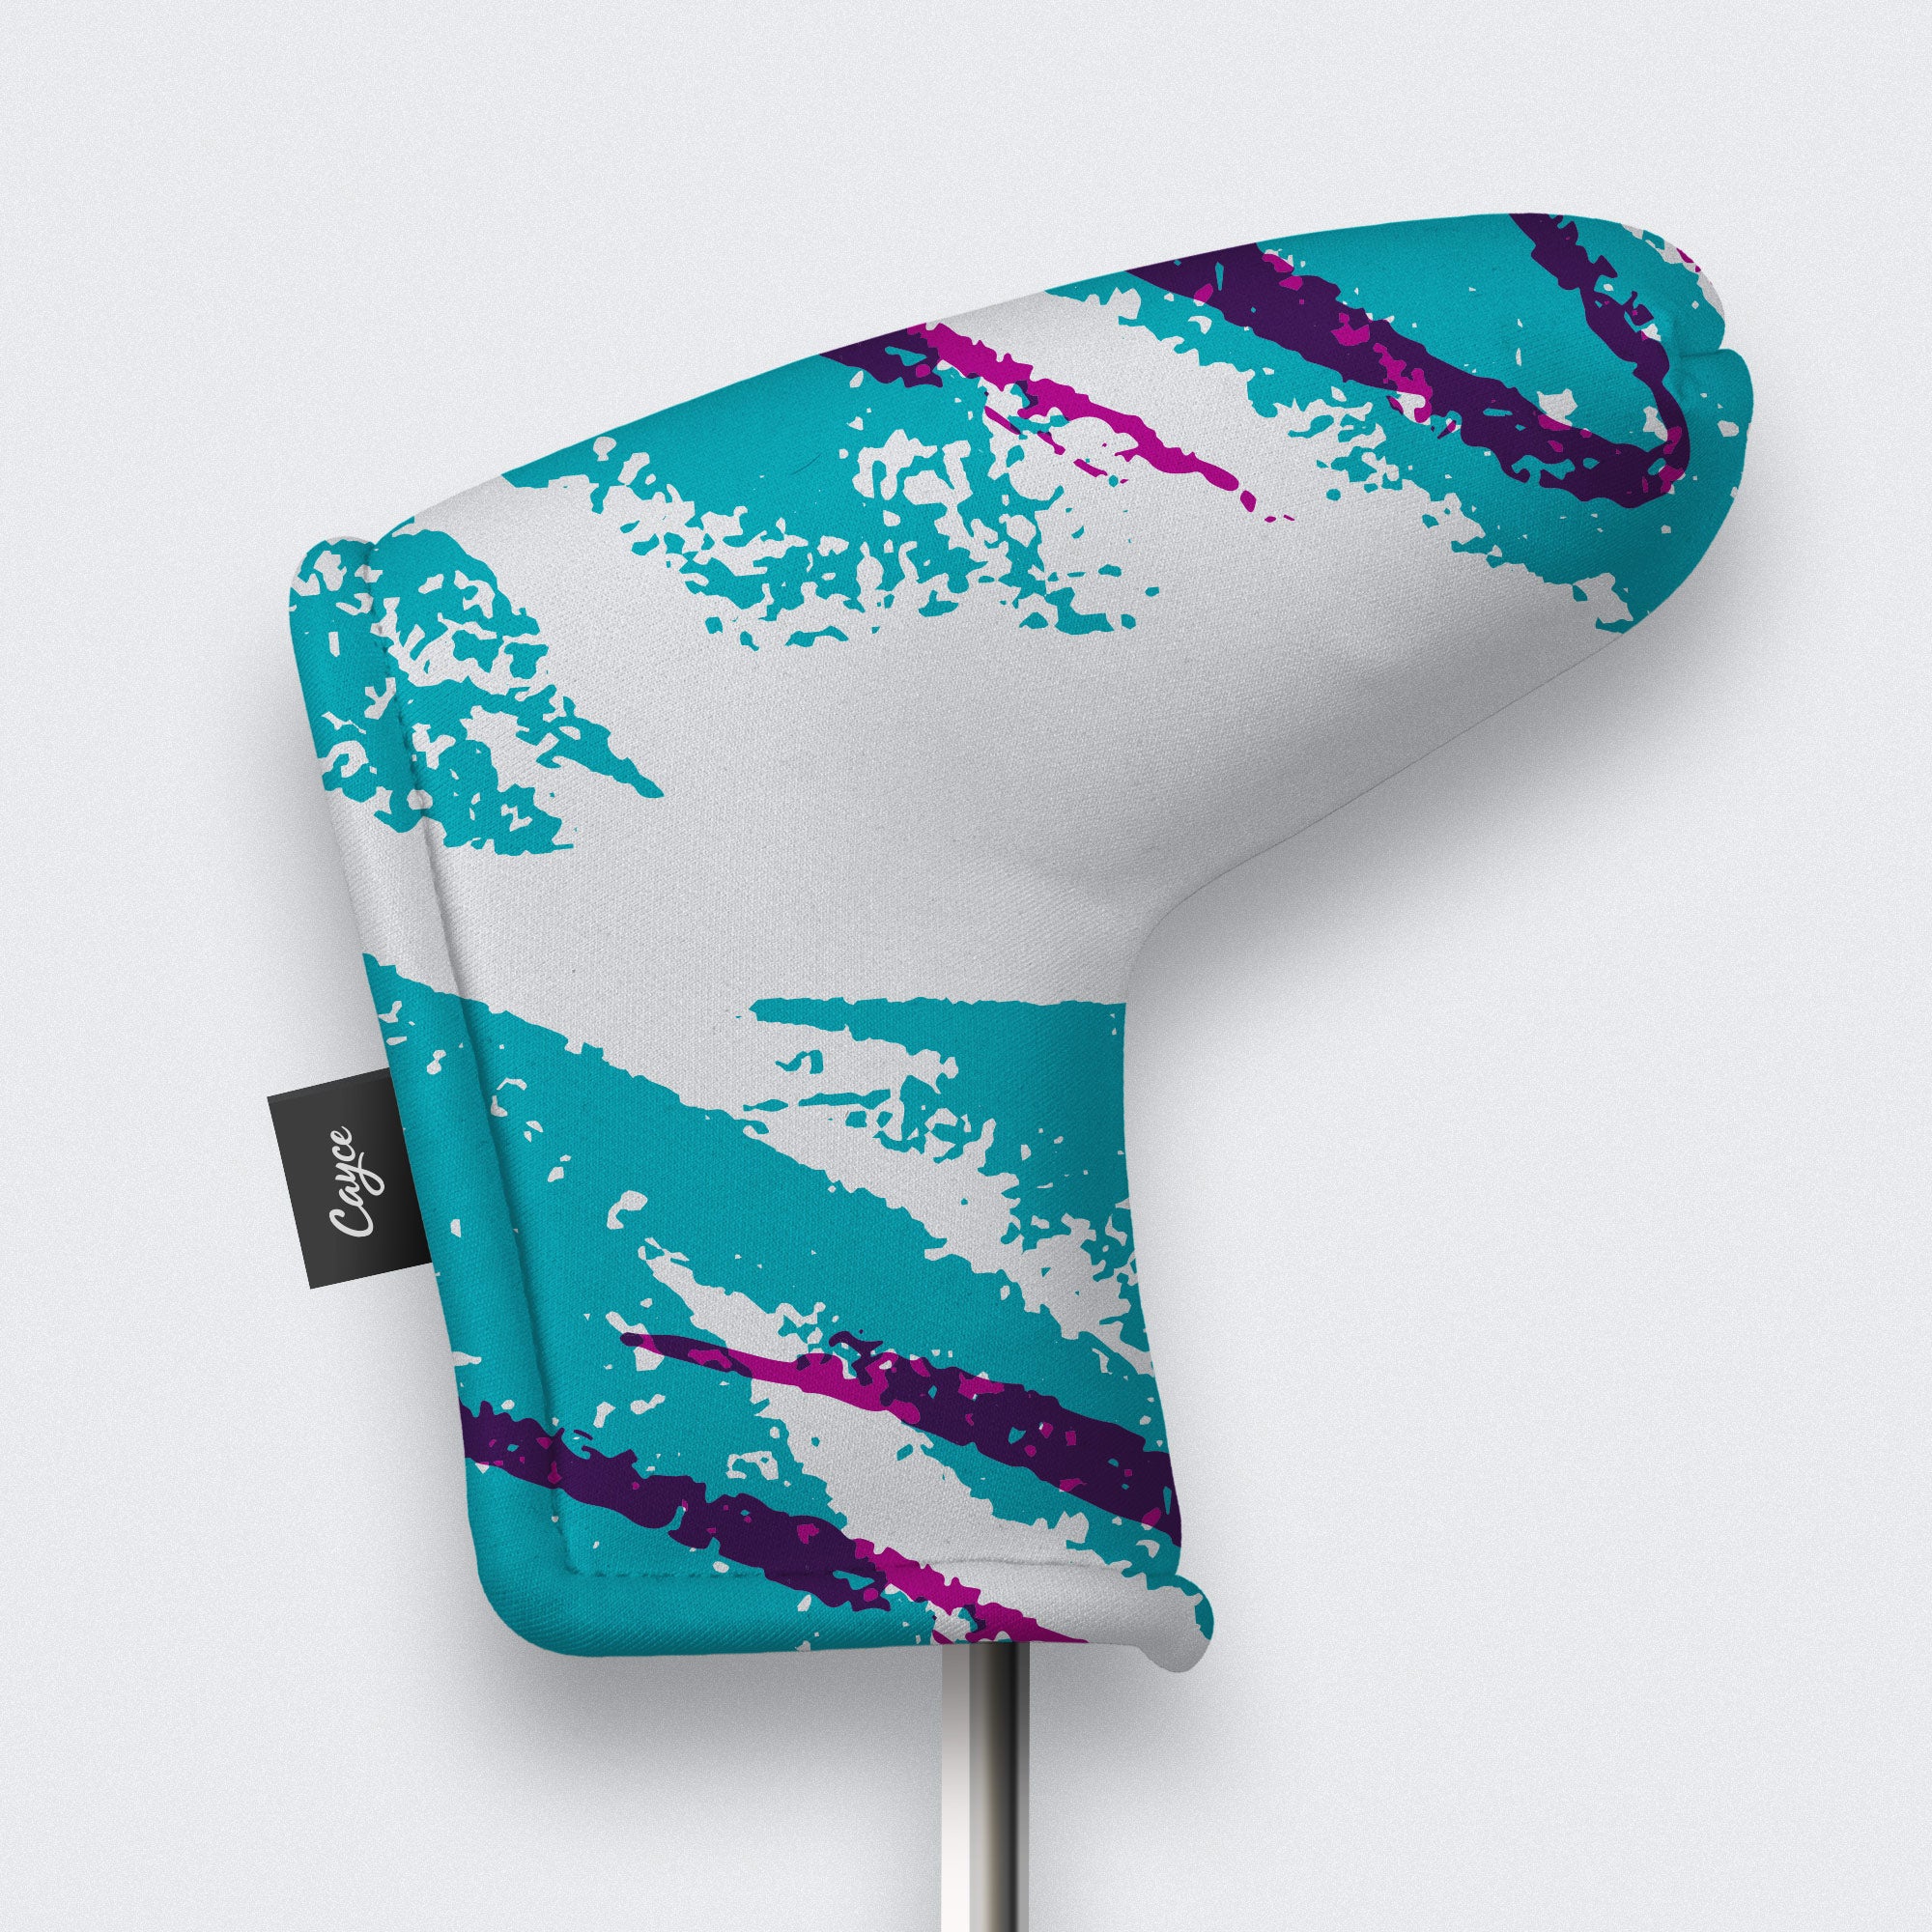 90's Jazz Cup Headcovers for Putters, Drivers & Fairway Woods